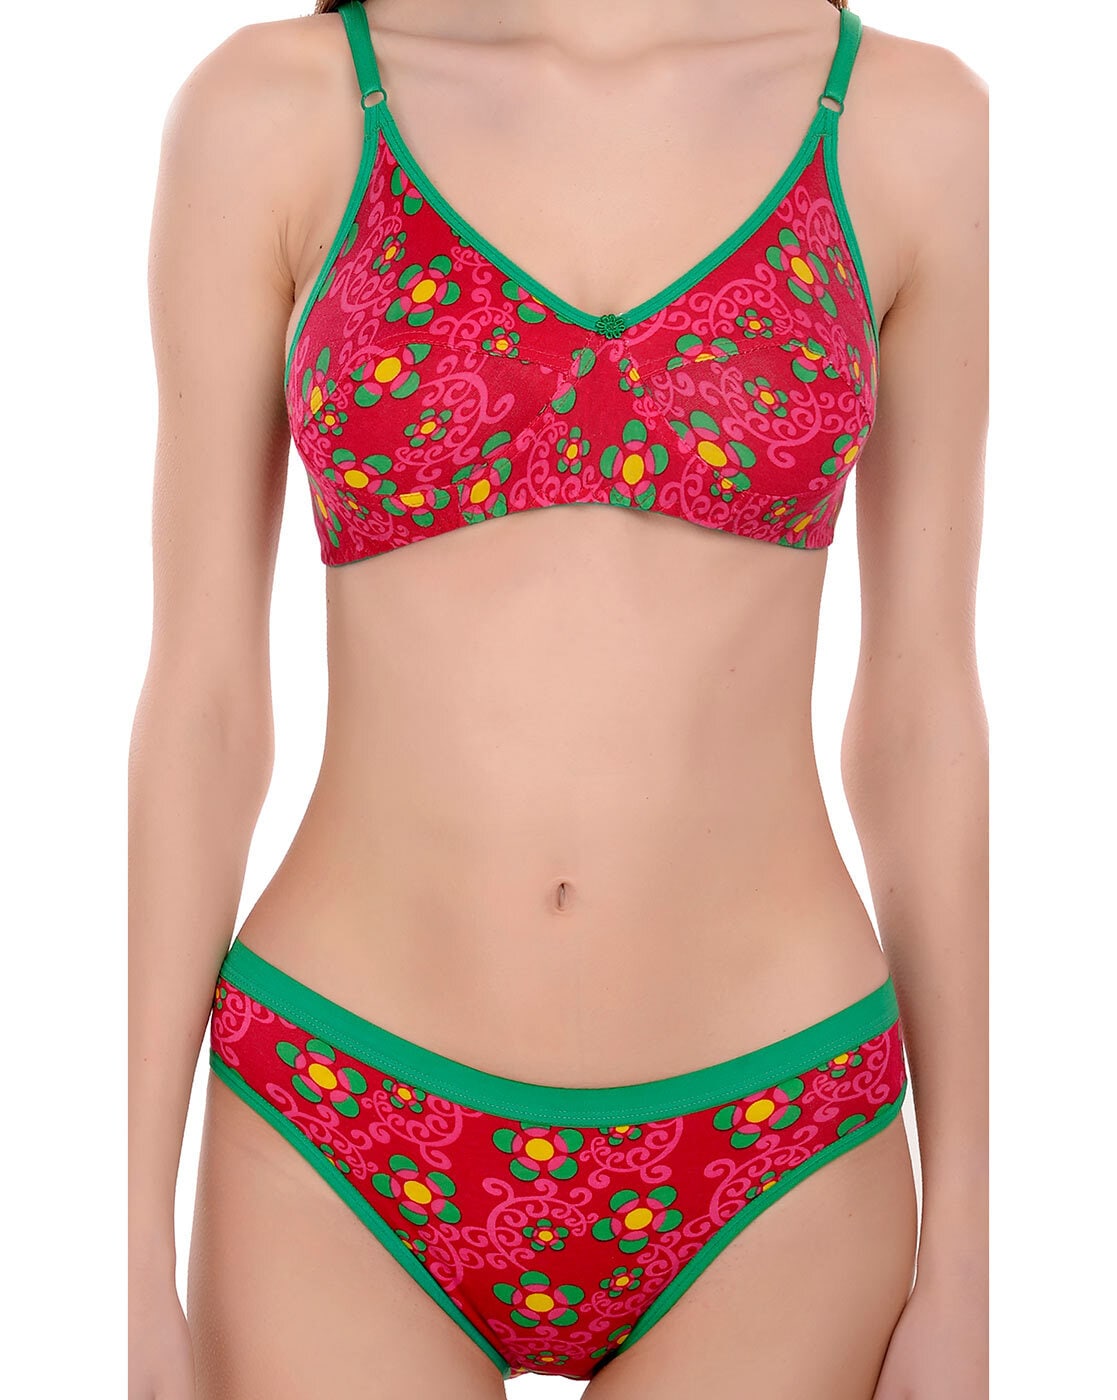 Net Floral Gowon Beauty Red Fancy Bra Panty Set at Rs 150/set in New Delhi